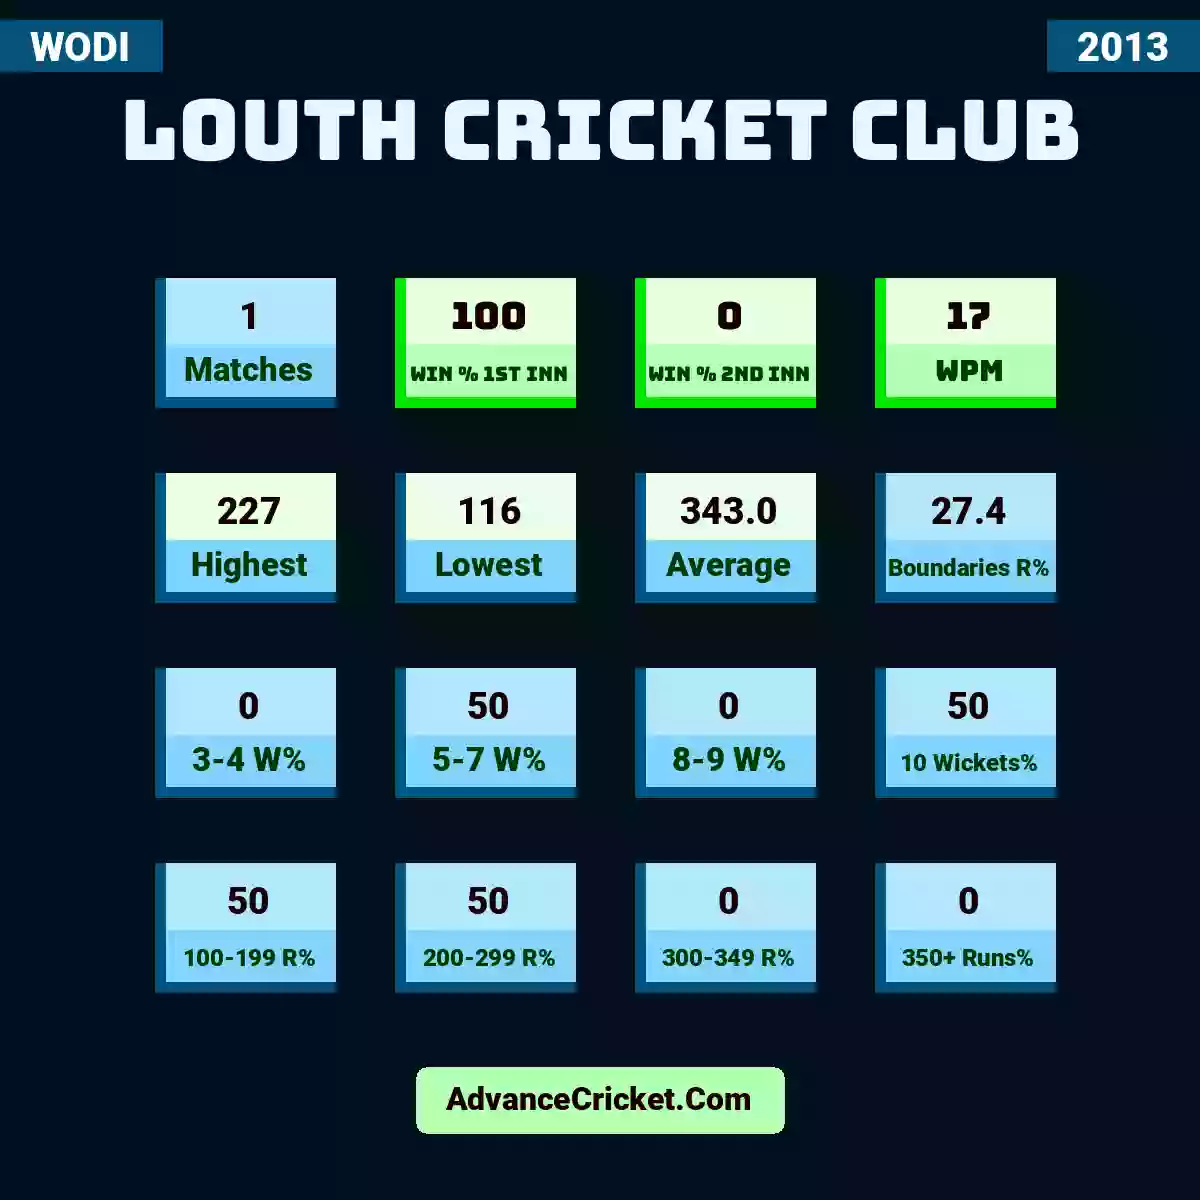 Image showing Louth Cricket Club with Matches: 1, Win % 1st Inn: 100, Win % 2nd Inn: 0, WPM: 17, Highest: 227, Lowest: 116, Average: 343.0, Boundaries R%: 27.4, 3-4 W%: 0, 5-7 W%: 50, 8-9 W%: 0, 10 Wickets%: 50, 100-199 R%: 50, 200-299 R%: 50, 300-349 R%: 0, 350+ Runs%: 0.